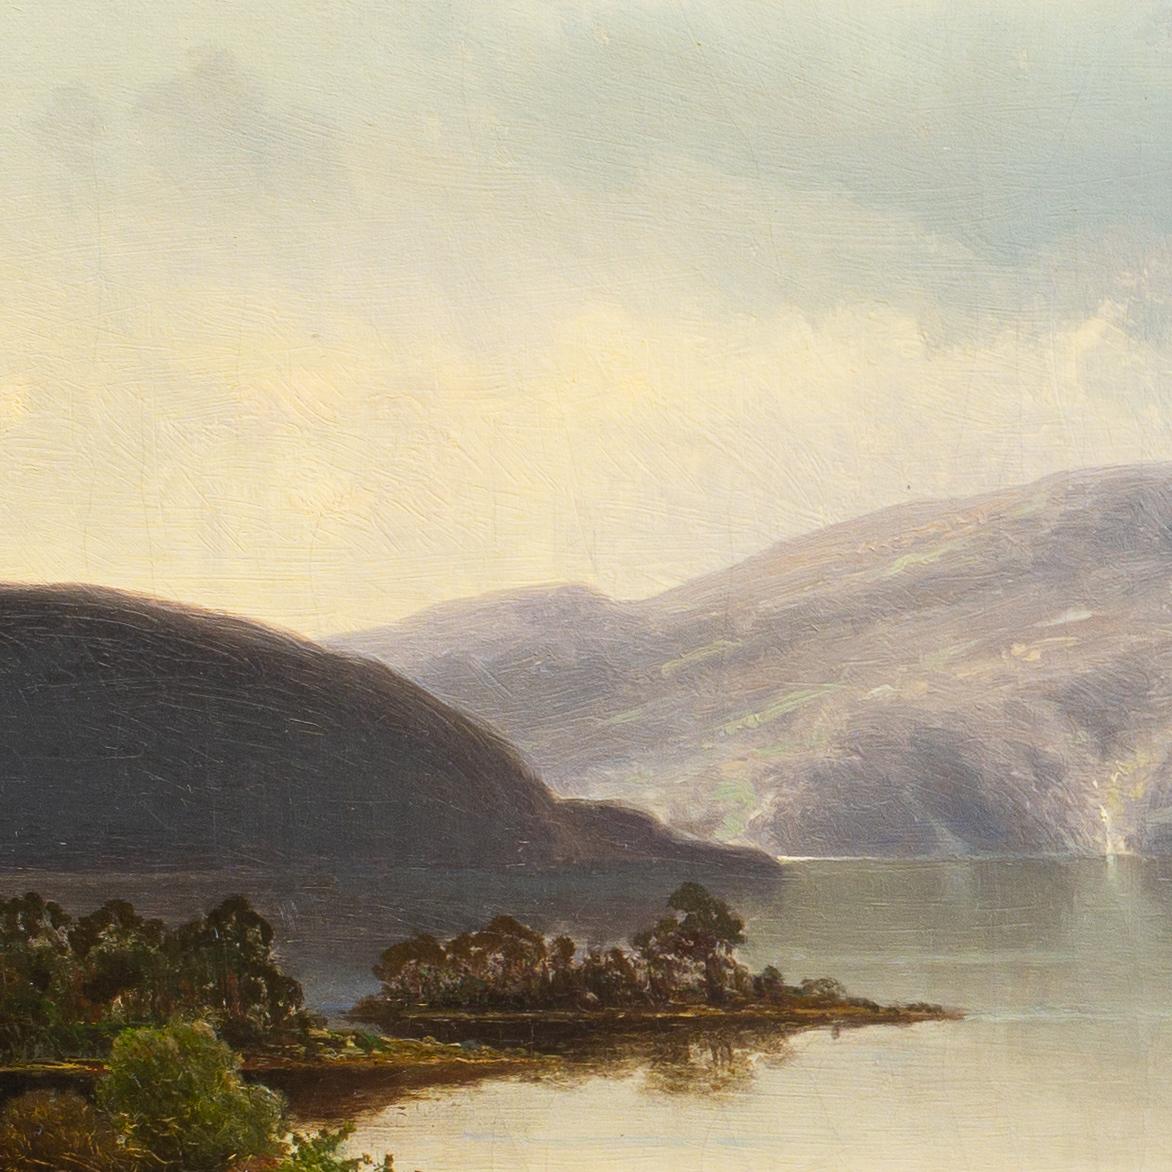 Setting Out in the Fjords 1858 by Swedish Artist Axel Nordgren, Oil on Canvas 3